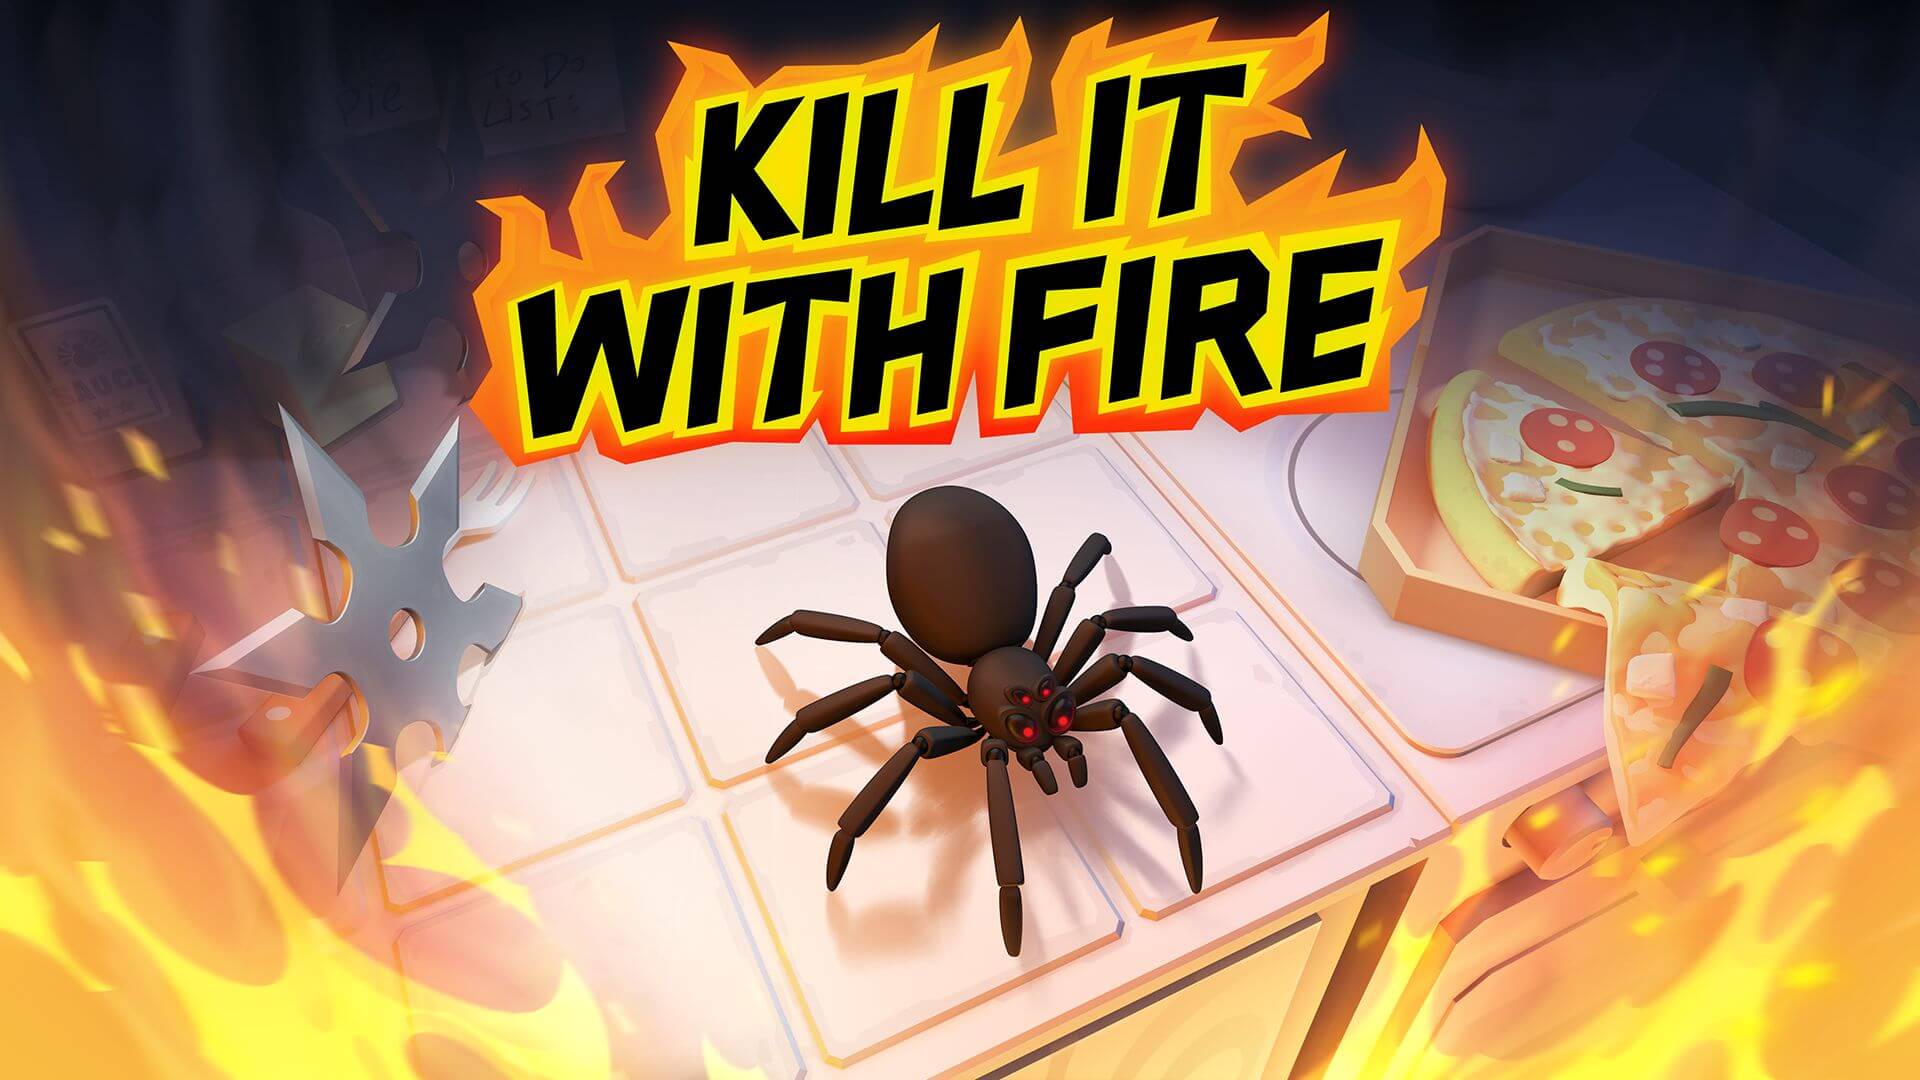 Kill It With Fire เตรียมลง PS4, Xbox One, Nintendo Switch, iOS และ Android 4 มี.ค. นี้